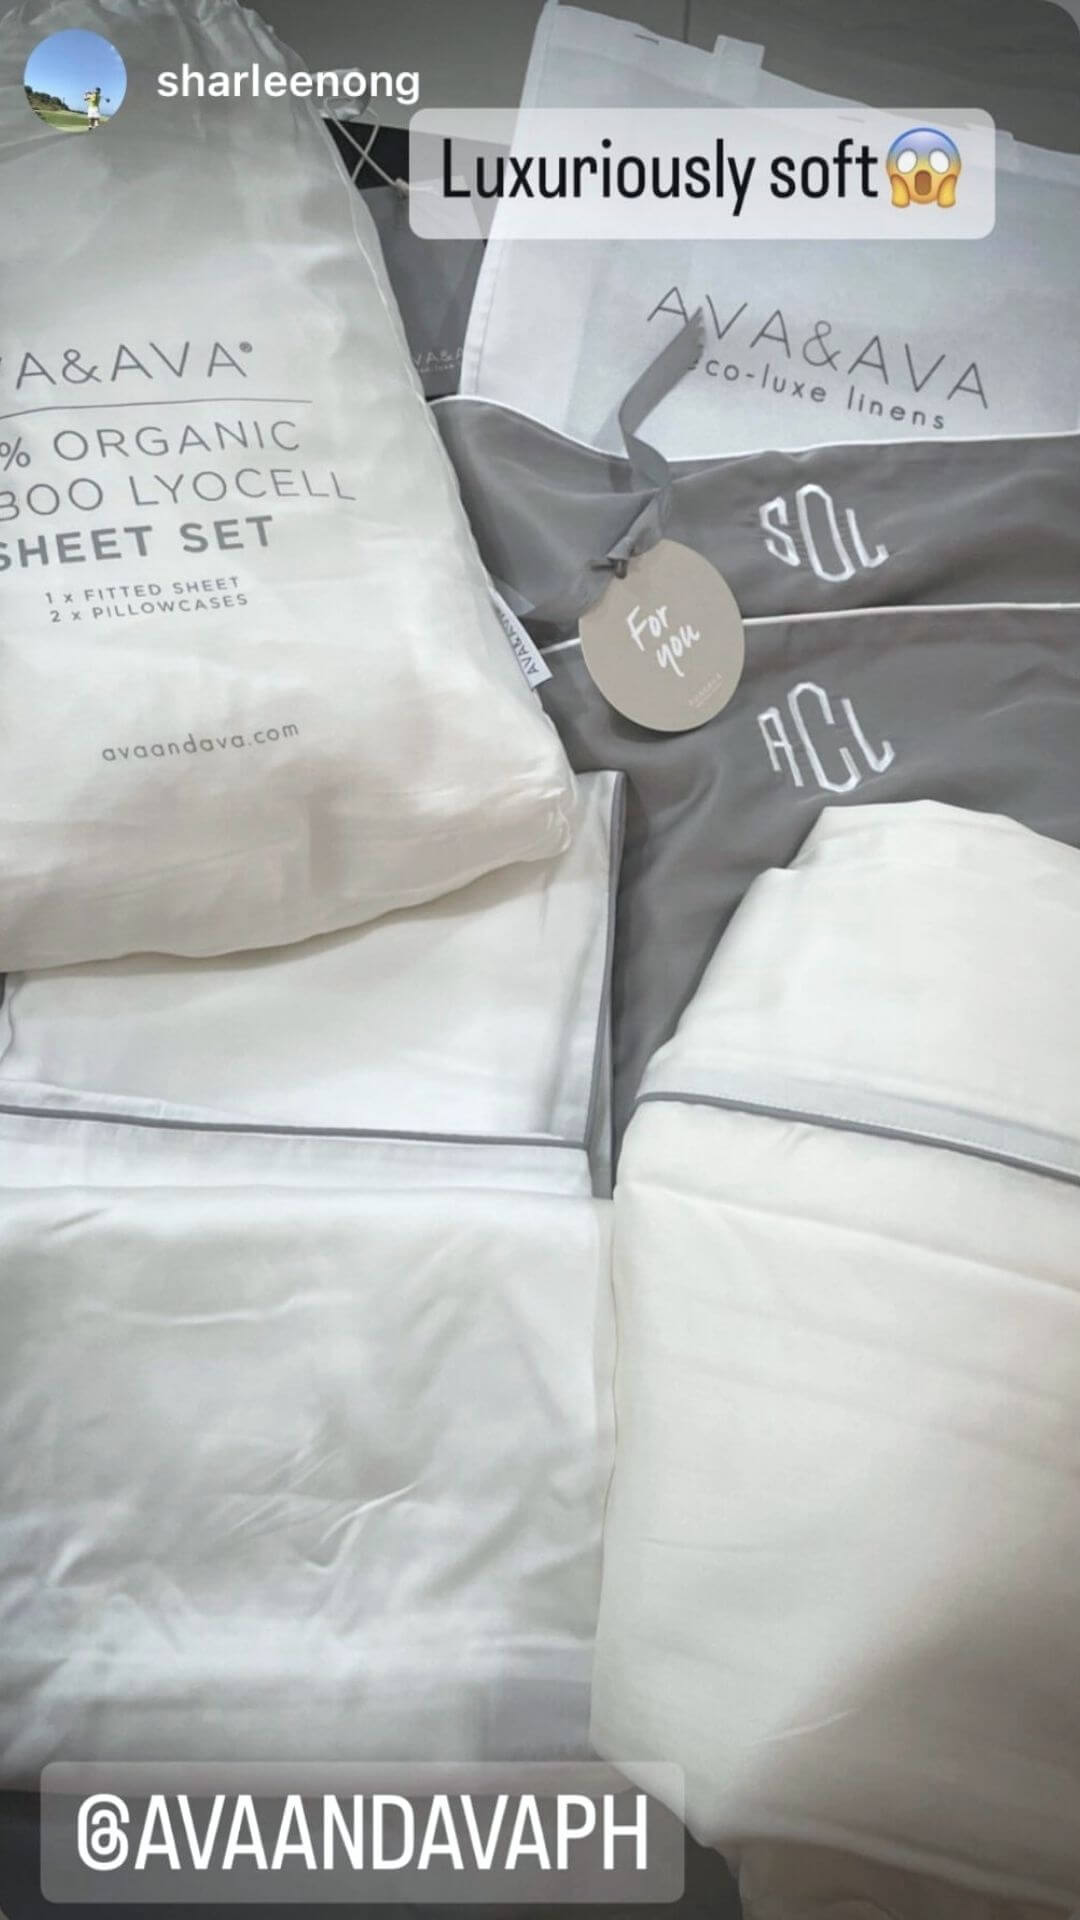 ava and ava ph review - white organic bamboo lyocell sheets and gray pillowcase with professional looking embroidery monogram